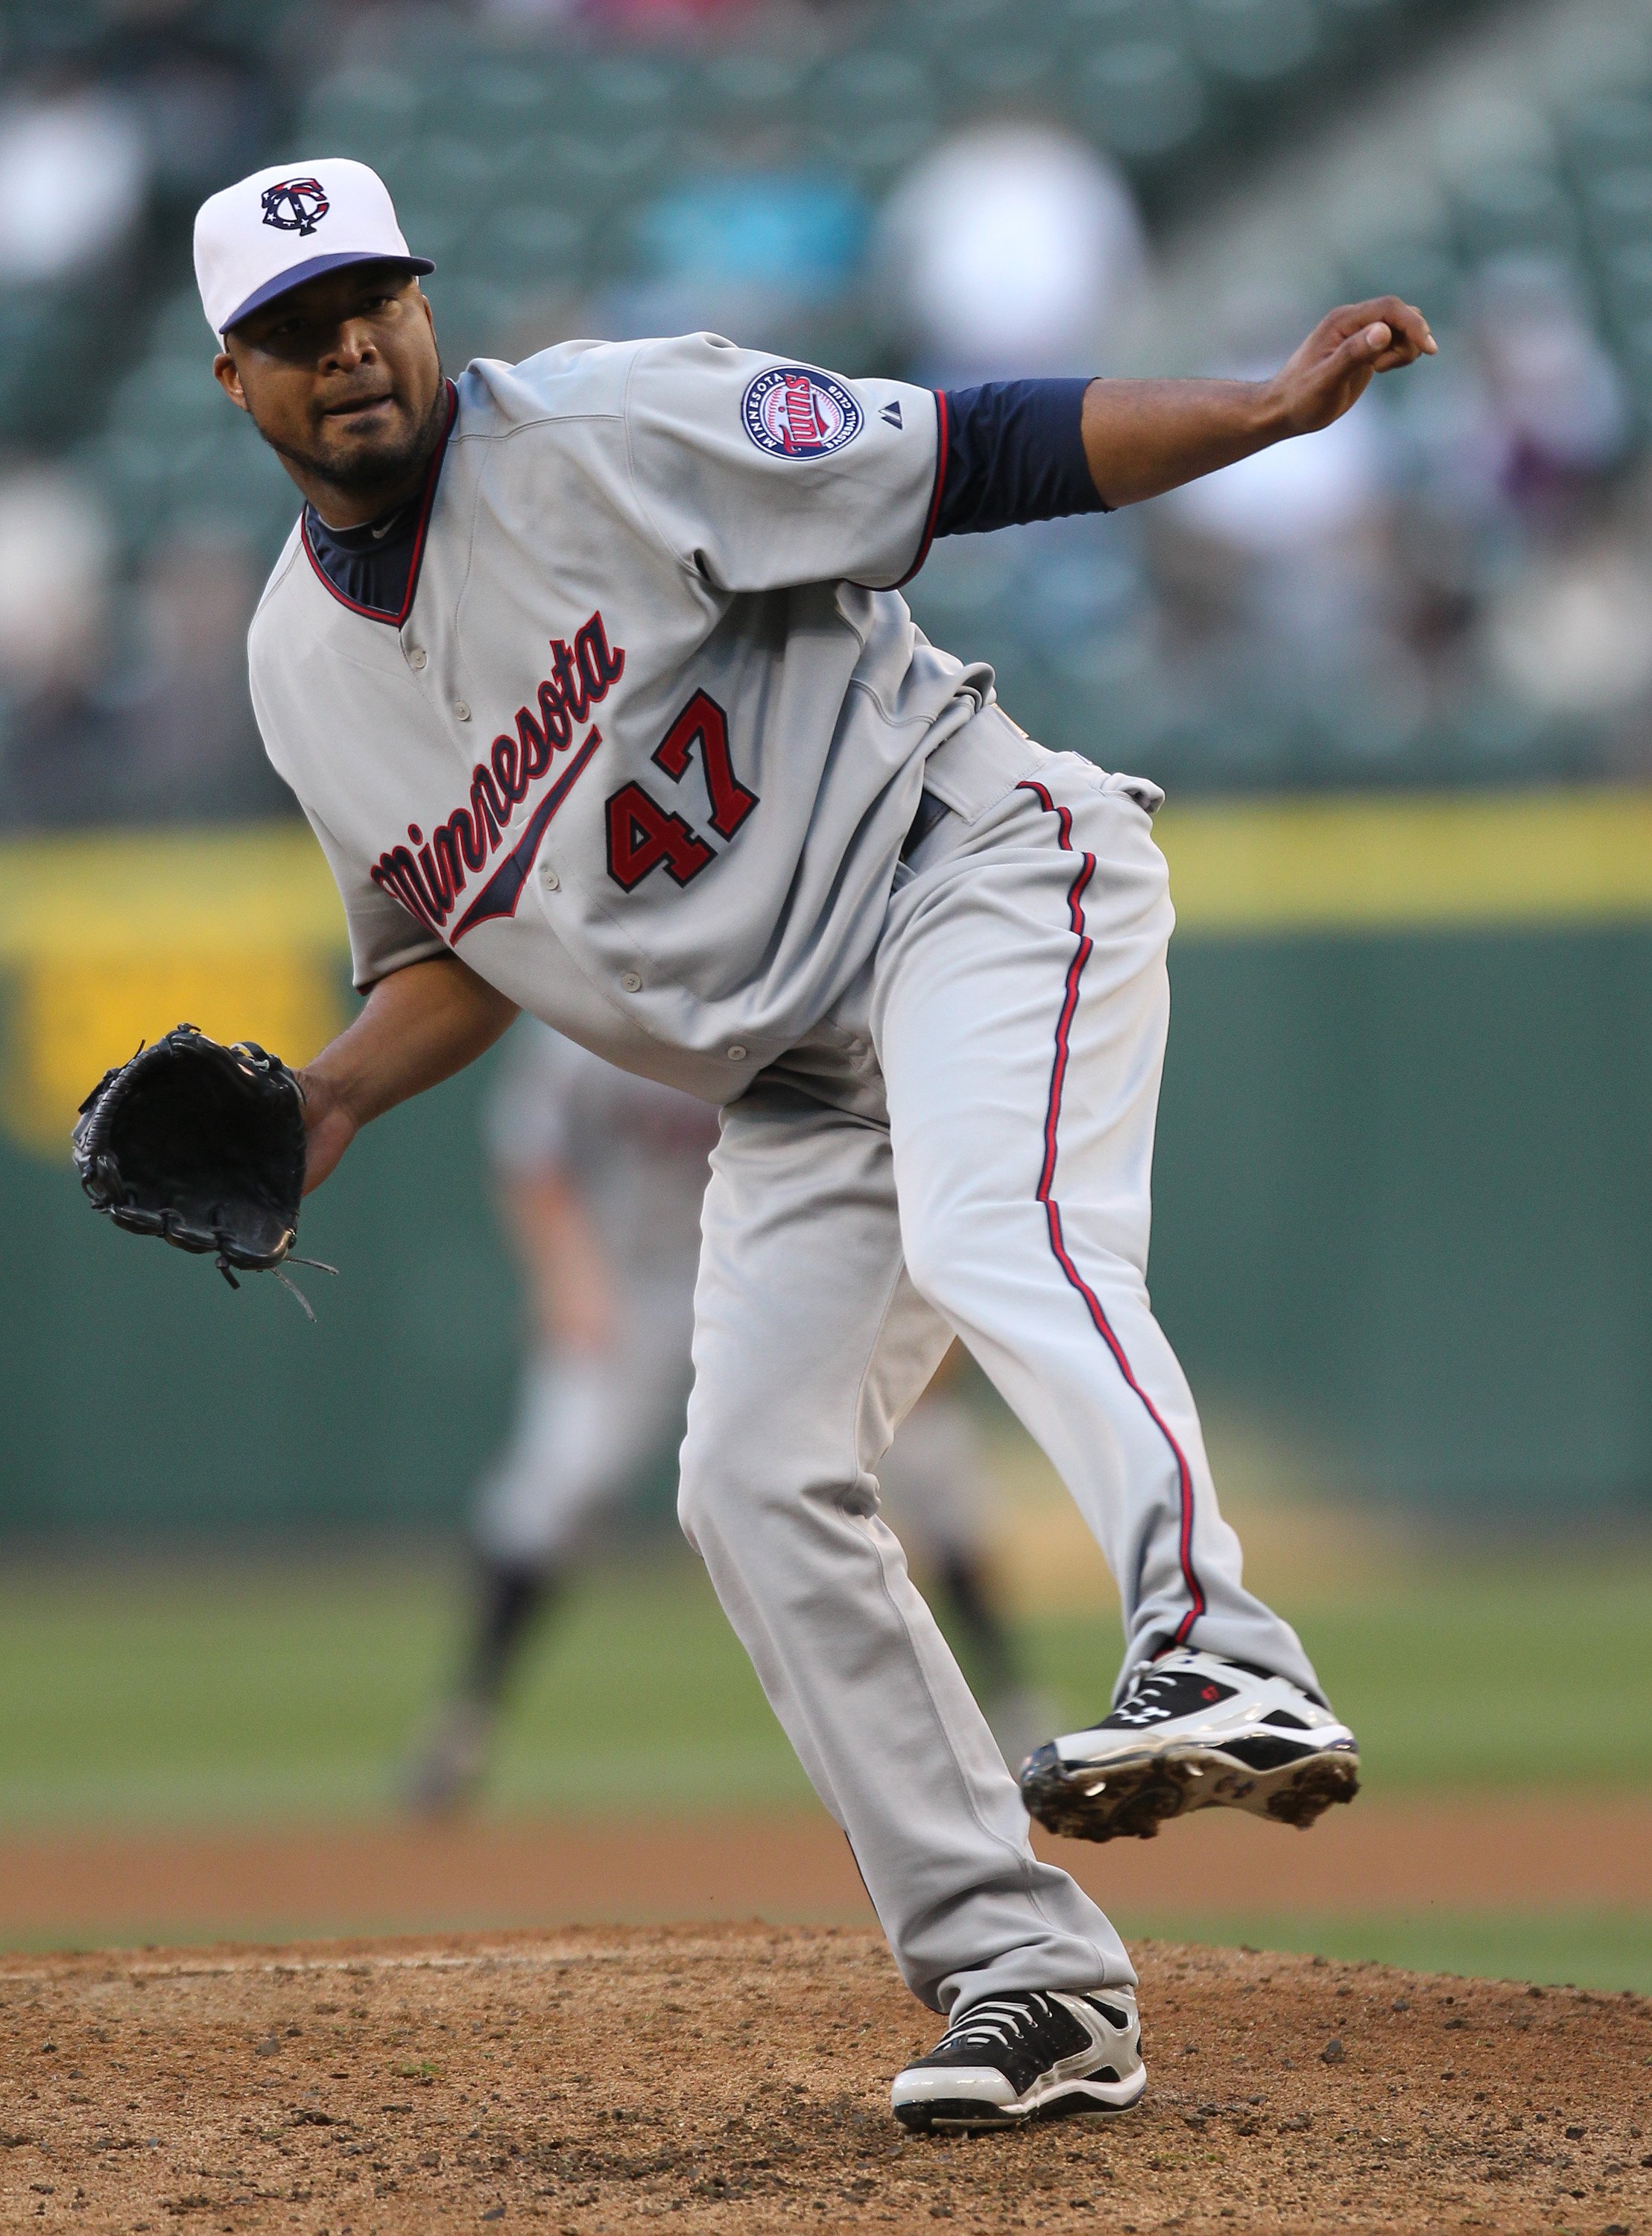 SEATTLE - MAY 31:  Starting pitcher Francisco Liriano #47 of the Minnesota Twins pitches against the Seattle Mariners at Safeco Field on May 31, 2010 in Seattle, Washington. (Photo by Otto Greule Jr/Getty Images)